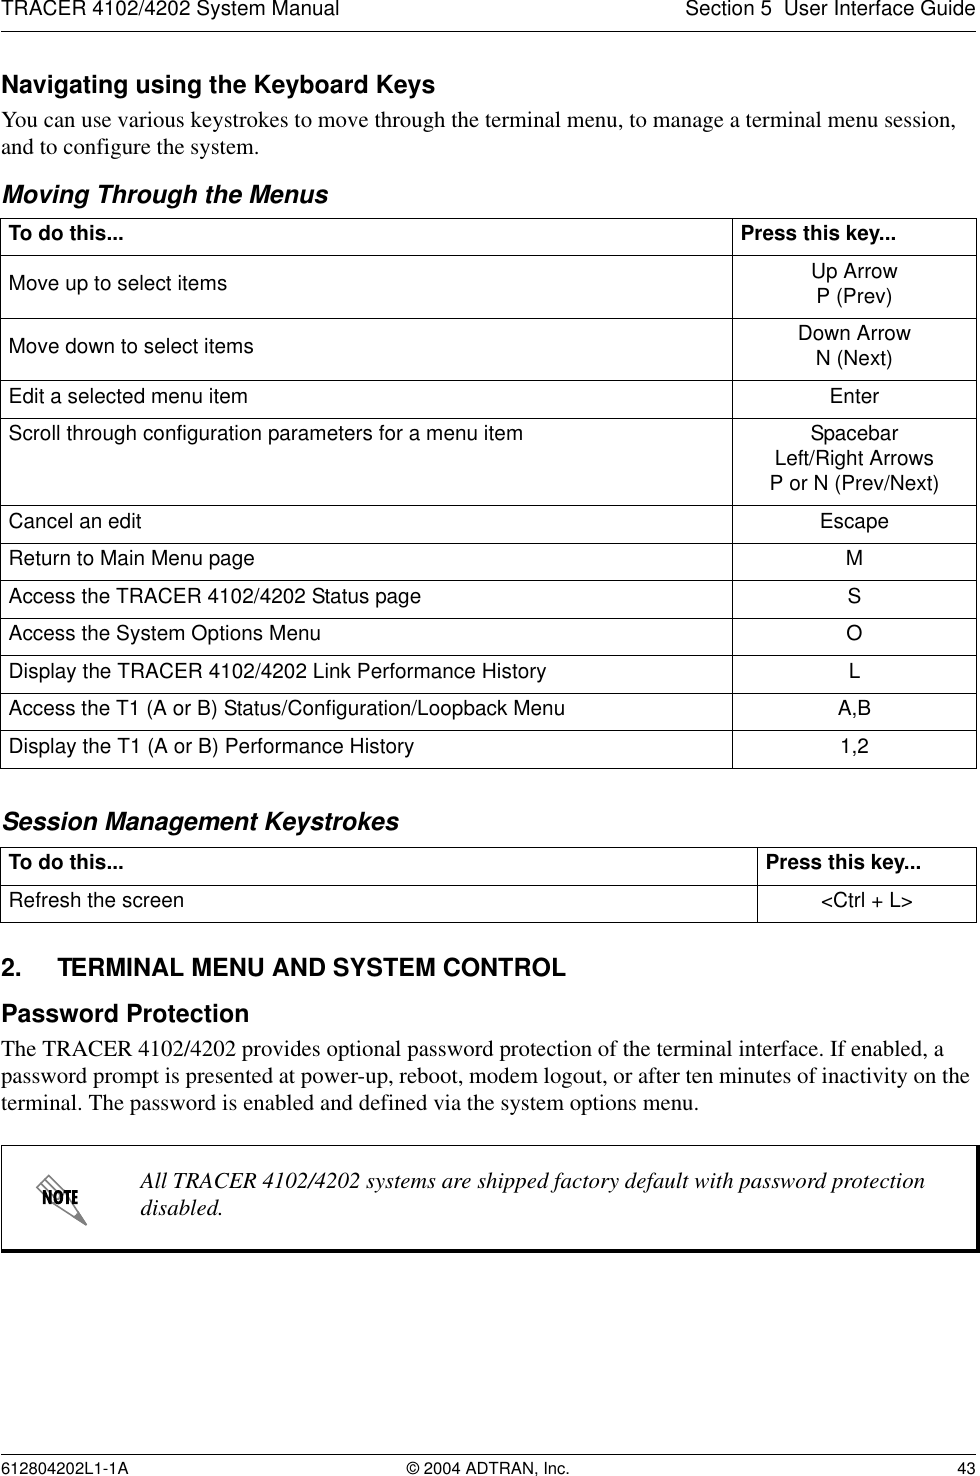 TRACER 4102/4202 System Manual Section 5  User Interface Guide612804202L1-1A © 2004 ADTRAN, Inc. 43Navigating using the Keyboard KeysYou can use various keystrokes to move through the terminal menu, to manage a terminal menu session, and to configure the system.Moving Through the MenusSession Management Keystrokes2. TERMINAL MENU AND SYSTEM CONTROLPassword ProtectionThe TRACER 4102/4202 provides optional password protection of the terminal interface. If enabled, a password prompt is presented at power-up, reboot, modem logout, or after ten minutes of inactivity on the terminal. The password is enabled and defined via the system options menu.To do this... Press this key...Move up to select items Up ArrowP (Prev)Move down to select items Down ArrowN (Next)Edit a selected menu item EnterScroll through configuration parameters for a menu item SpacebarLeft/Right ArrowsP or N (Prev/Next)Cancel an edit EscapeReturn to Main Menu page MAccess the TRACER 4102/4202 Status page SAccess the System Options Menu ODisplay the TRACER 4102/4202 Link Performance History LAccess the T1 (A or B) Status/Configuration/Loopback Menu A,BDisplay the T1 (A or B) Performance History 1,2To do this... Press this key...Refresh the screen &lt;Ctrl + L&gt;All TRACER 4102/4202 systems are shipped factory default with password protection disabled.